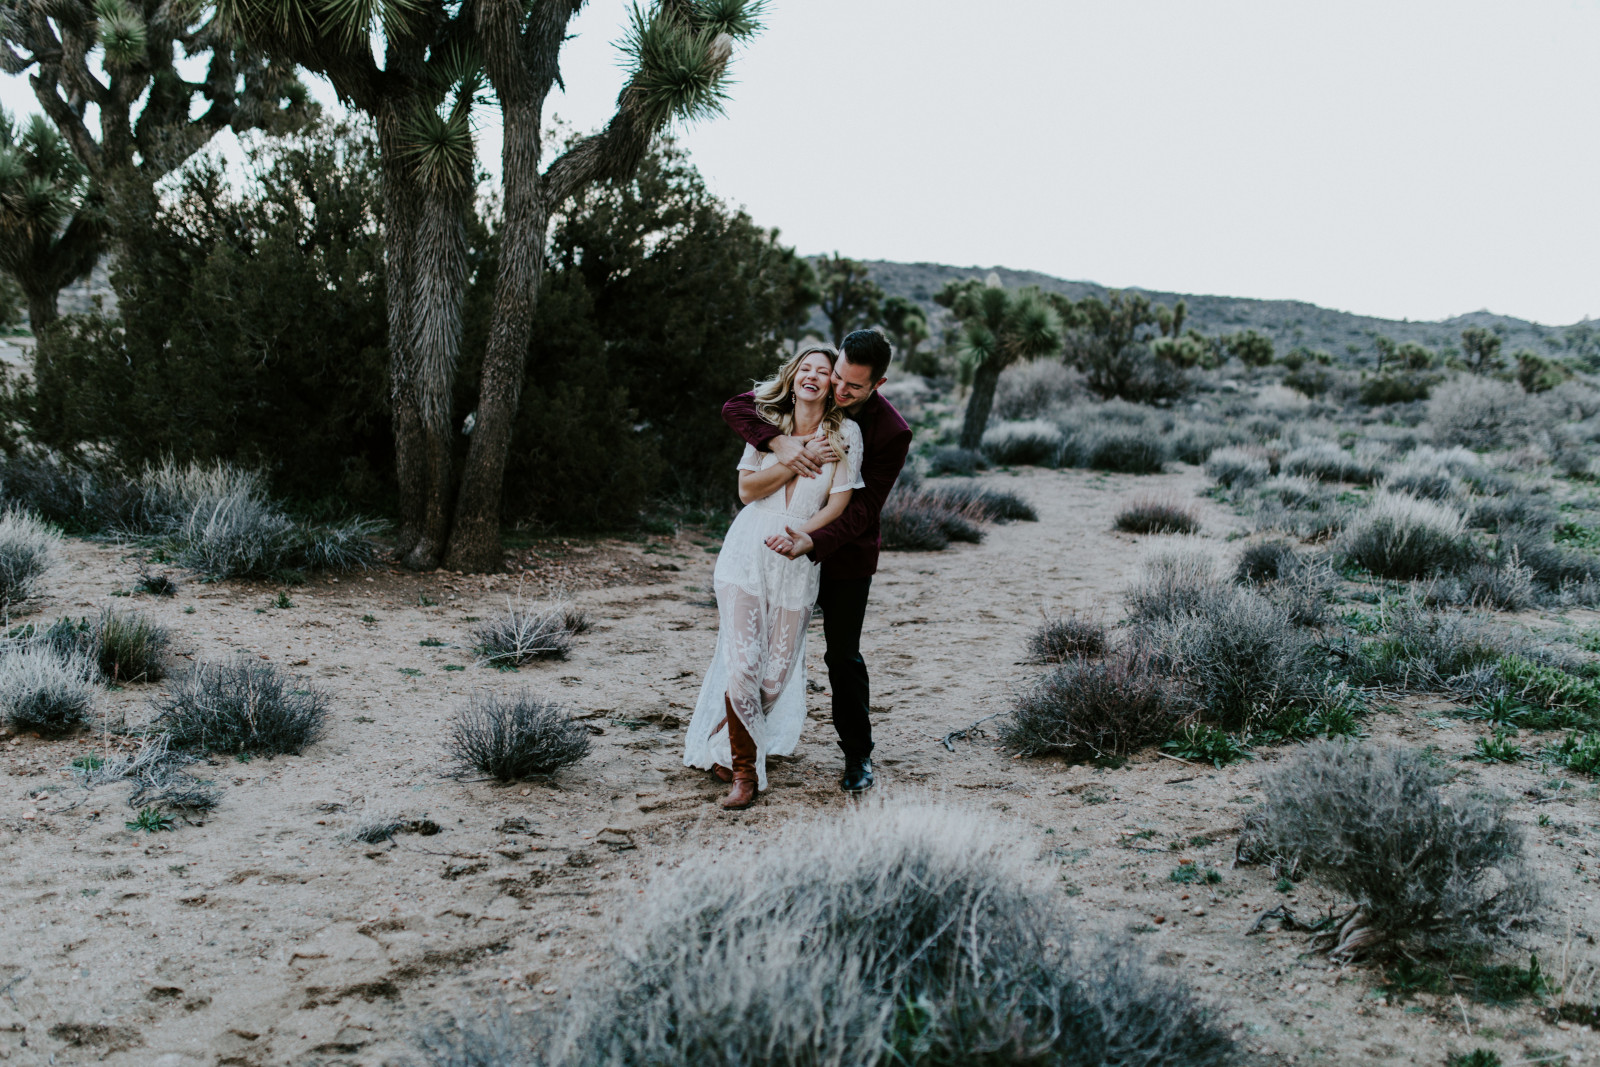 Alyssa holds Jeremy as they sit at Joshua Tree National Park, CA Elopement wedding photography at Joshua Tree National Park by Sienna Plus Josh.